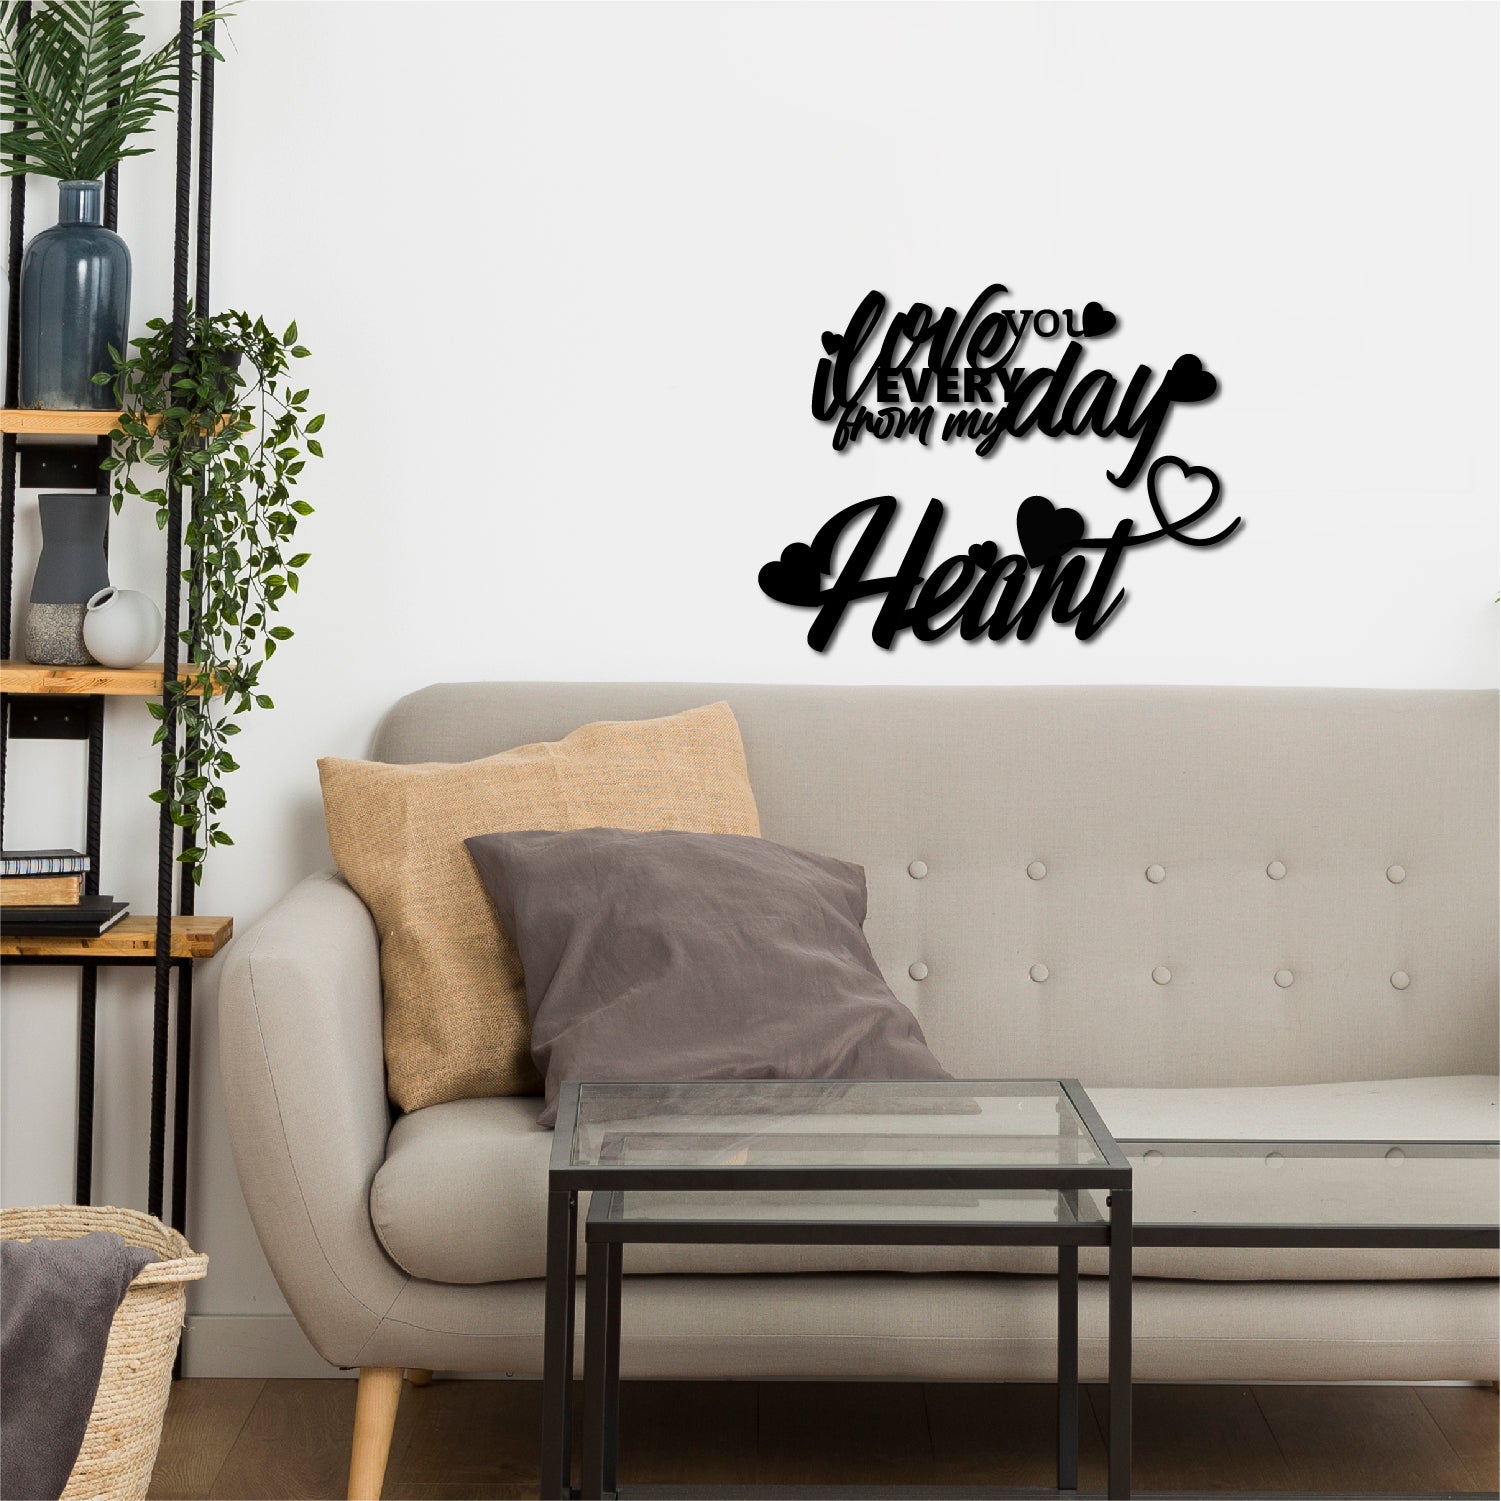 "Love You Everyday From My Heart" Black Engineered Wood Wall Art Cutout, Ready to Hang Home Decor 1